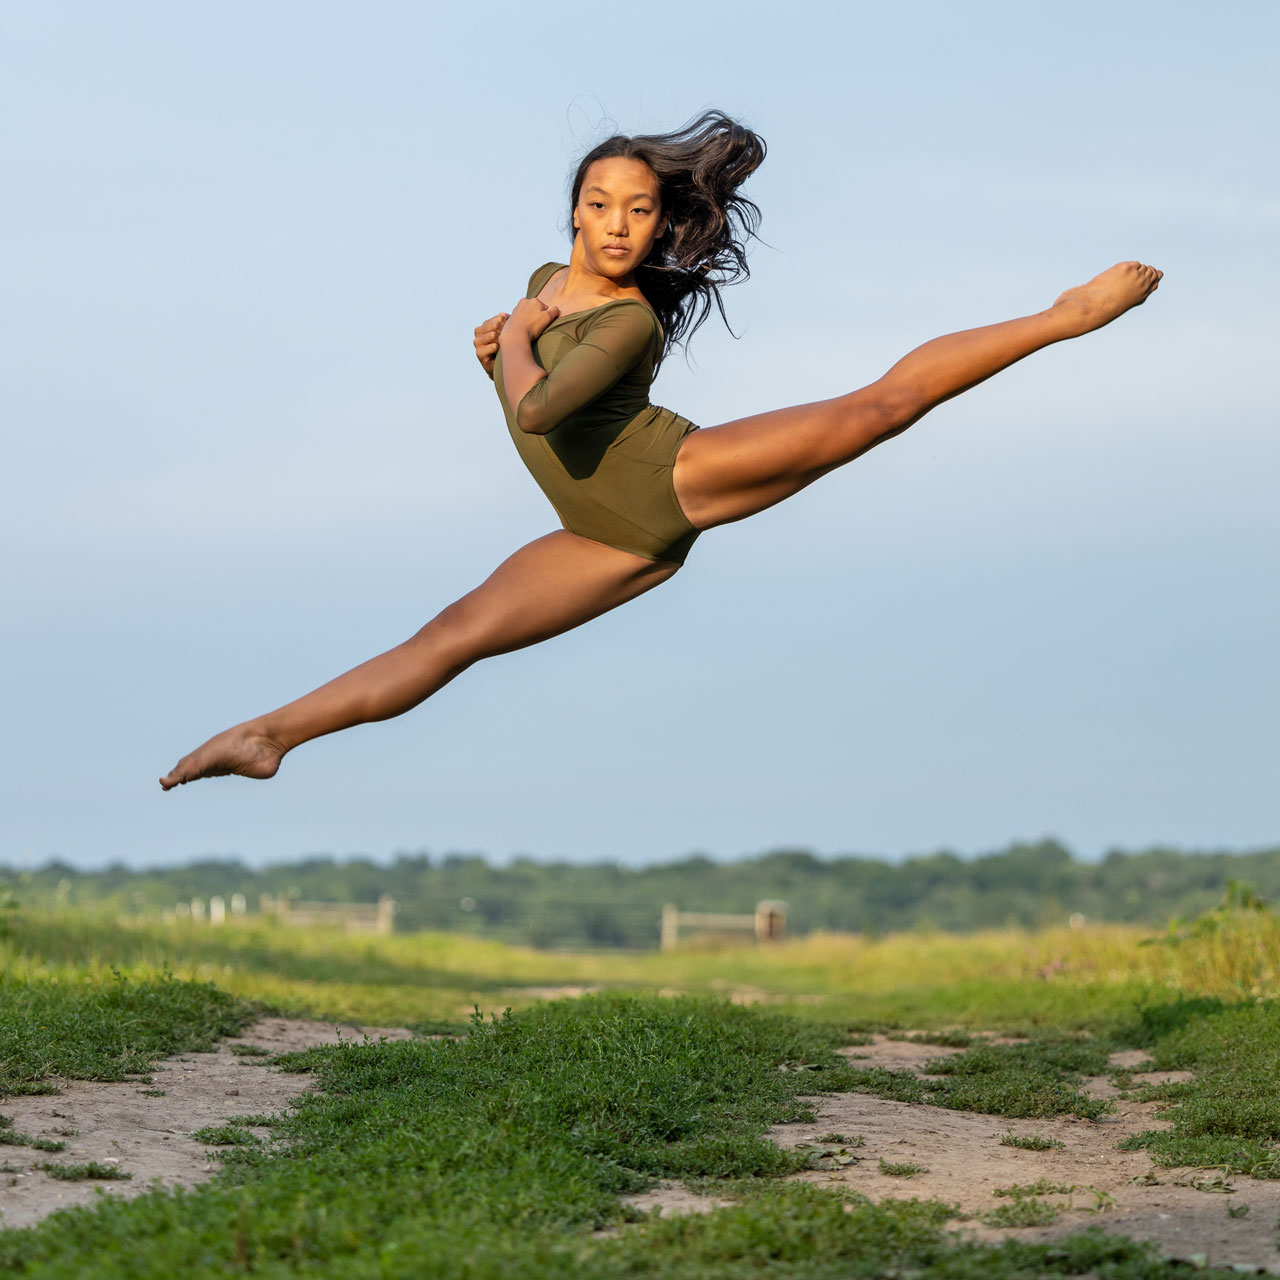 Exulting Images’ outdoor dance action shot of light-skinned dancer in olive green leotard leaping with legs in a split amongst a grassy field